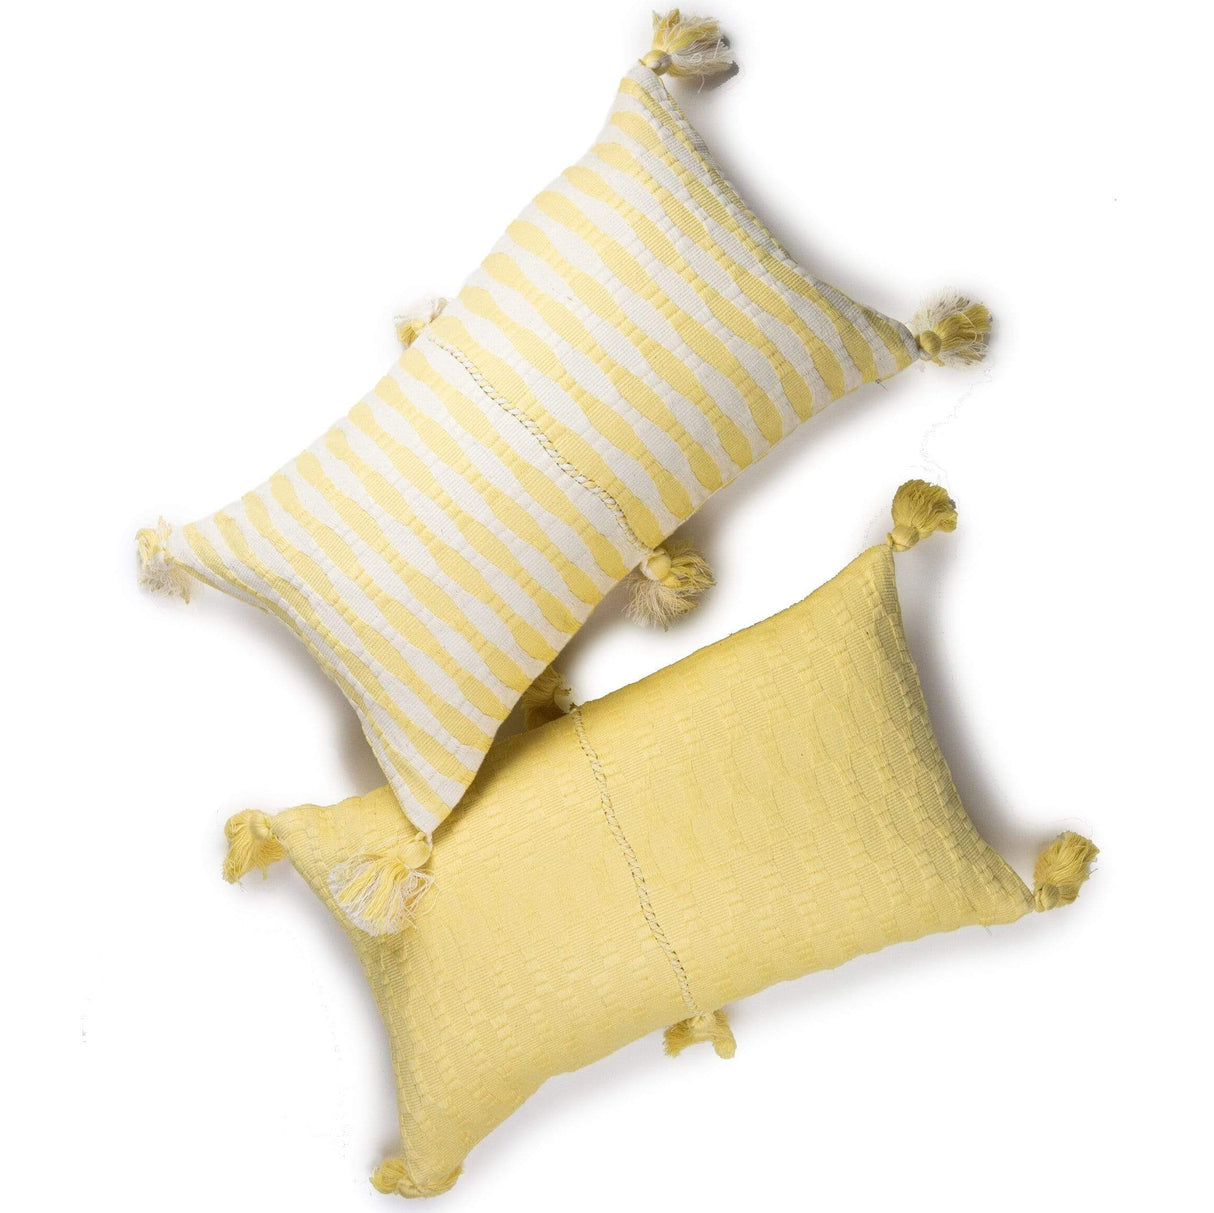 Archive New York Antigua Pillow - Butter Solid Pillow & Decor archive-R1220011-butter-solid